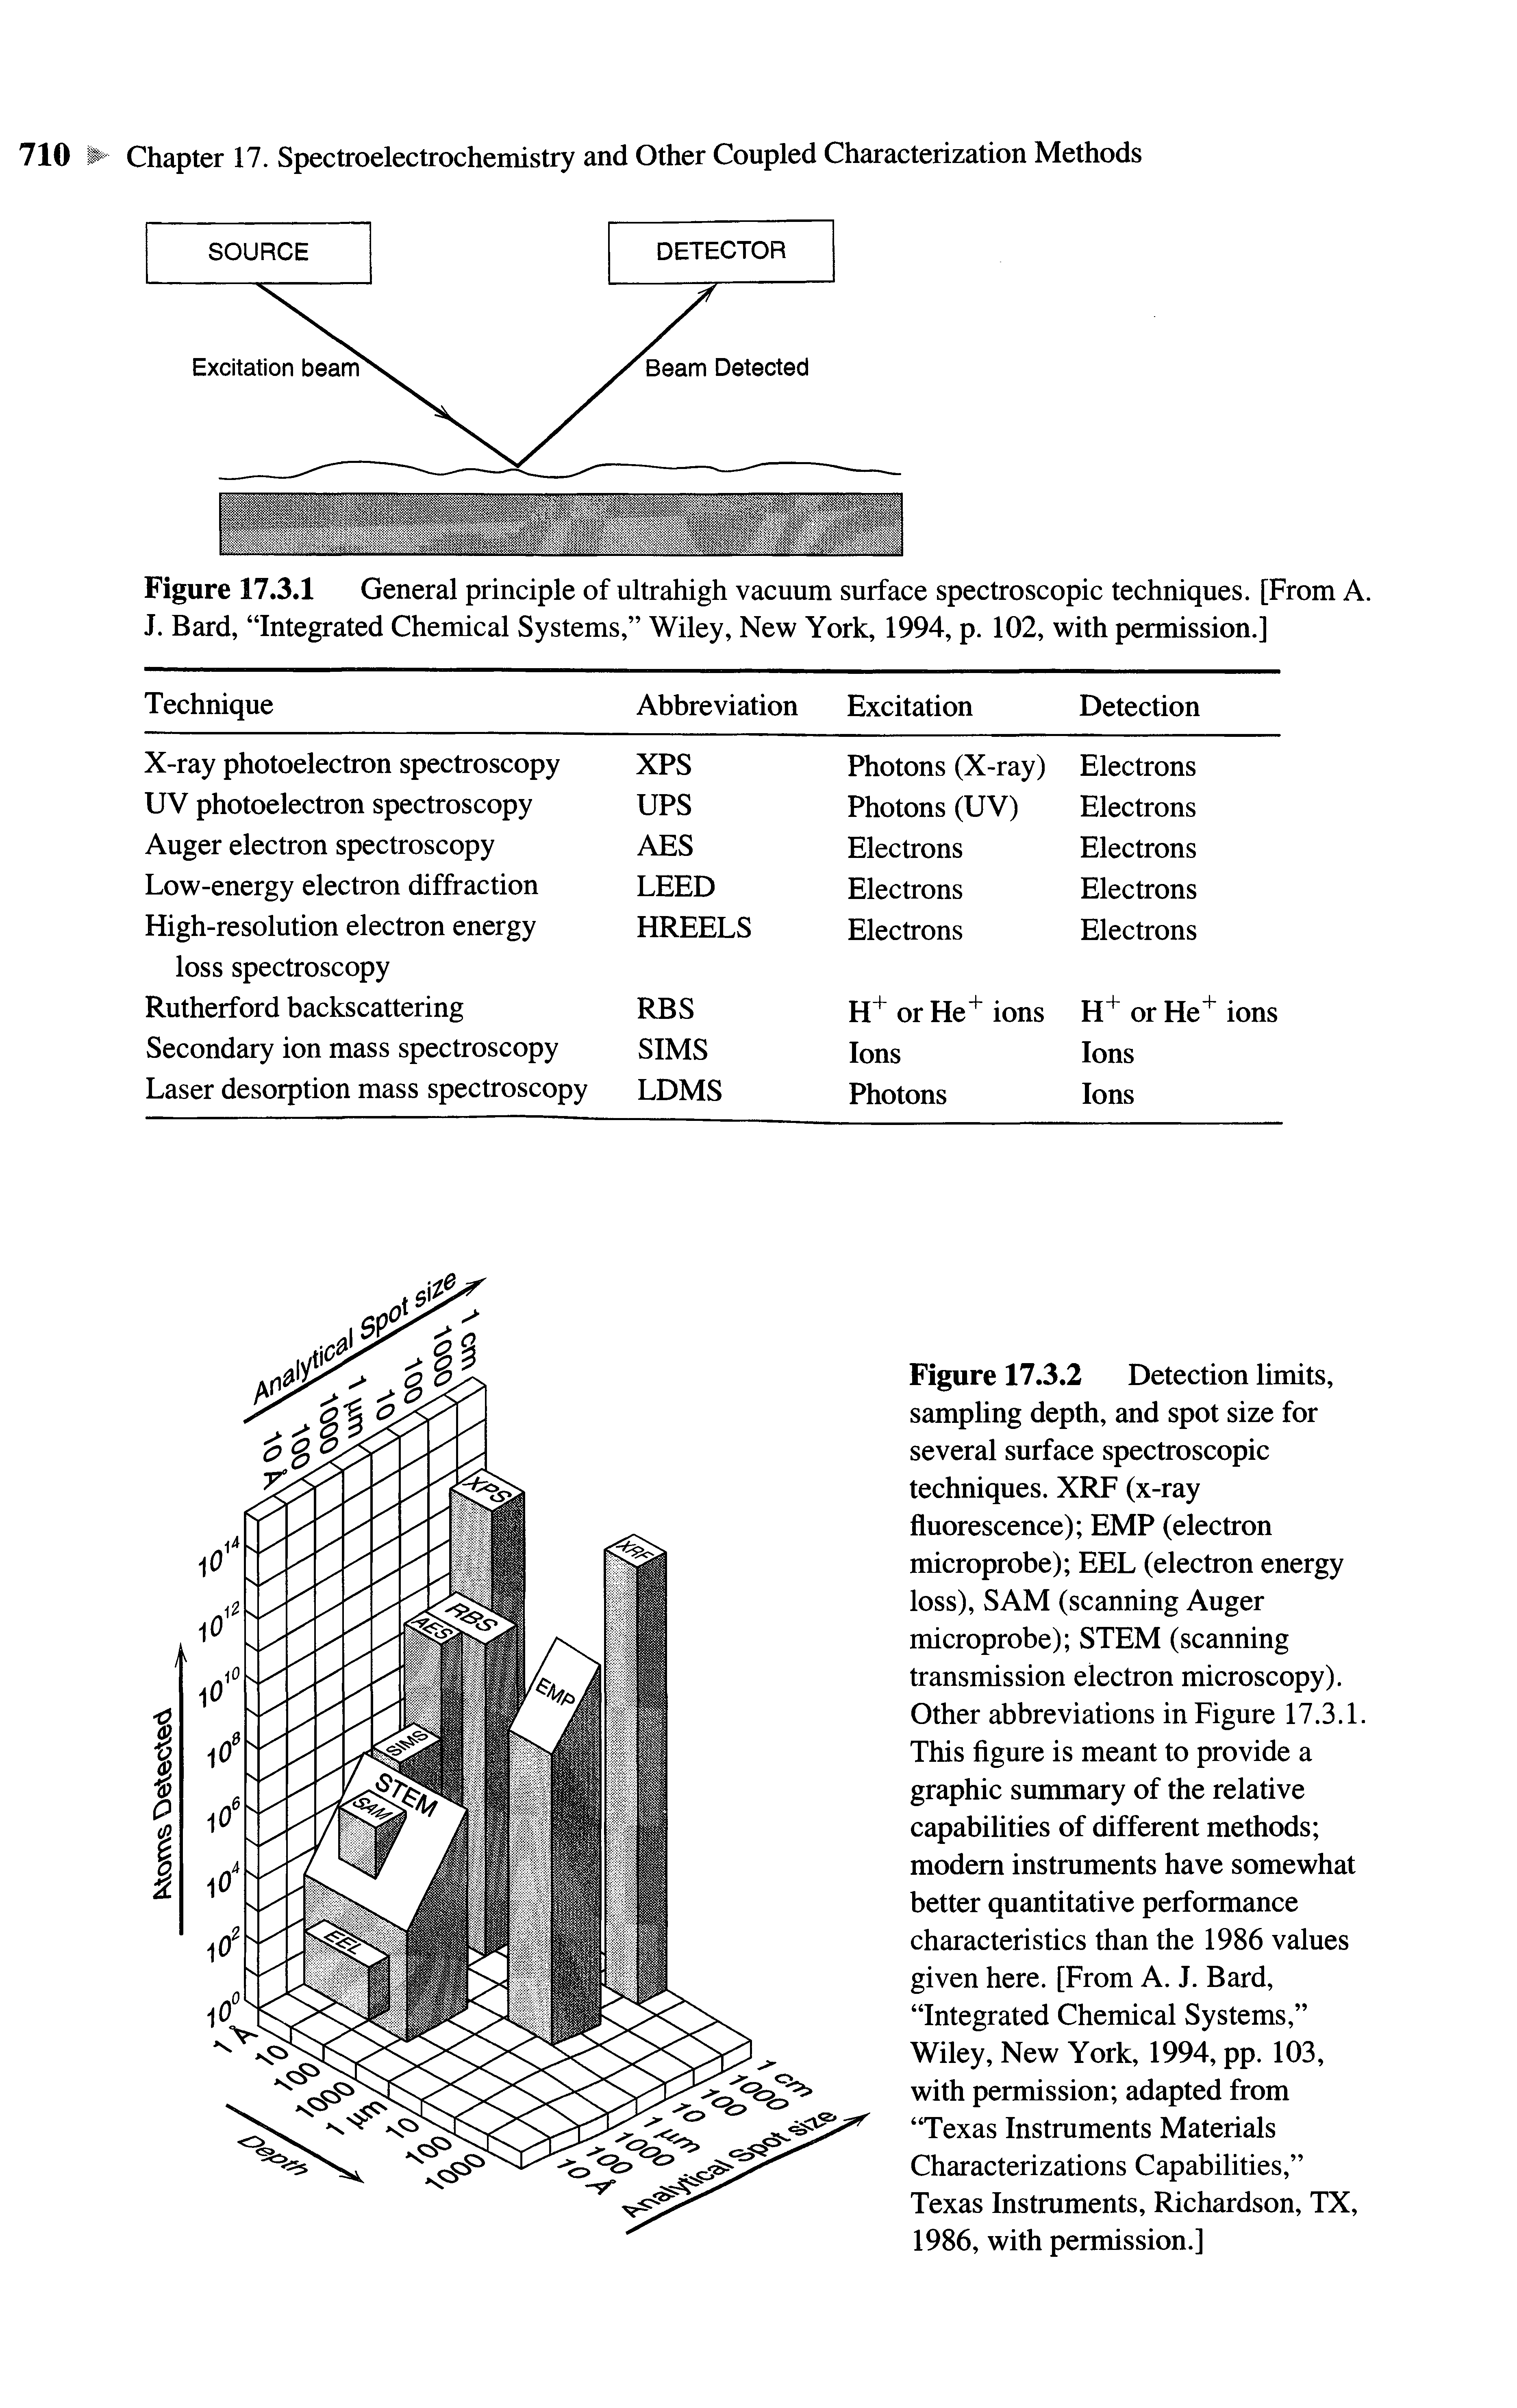 Figure 17.3.1 General principle of ultrahigh vacuum surface spectroscopic techniques. [From A. J. Bard, Integrated Chemical Systems, Wiley, New York, 1994, p. 102, with permission.]...